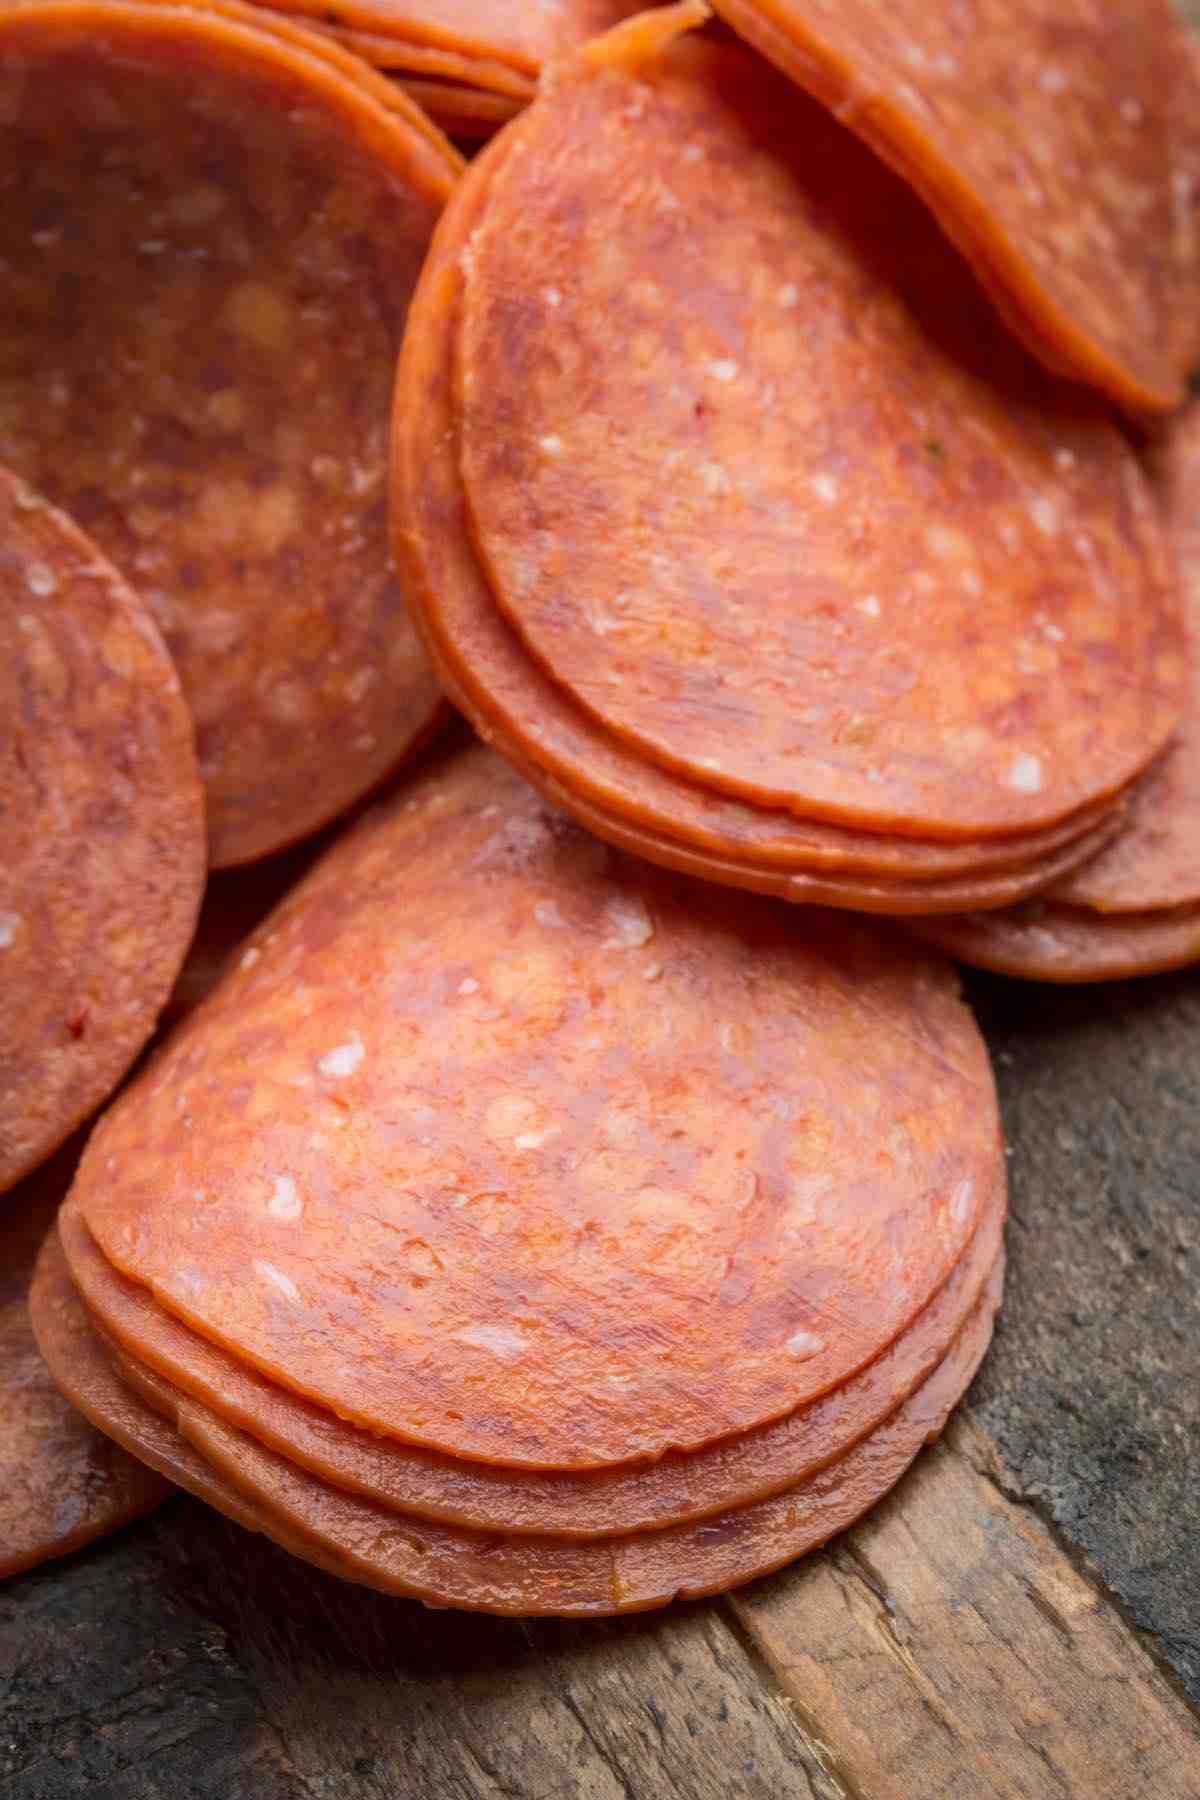 Is there pepperoni without beef?